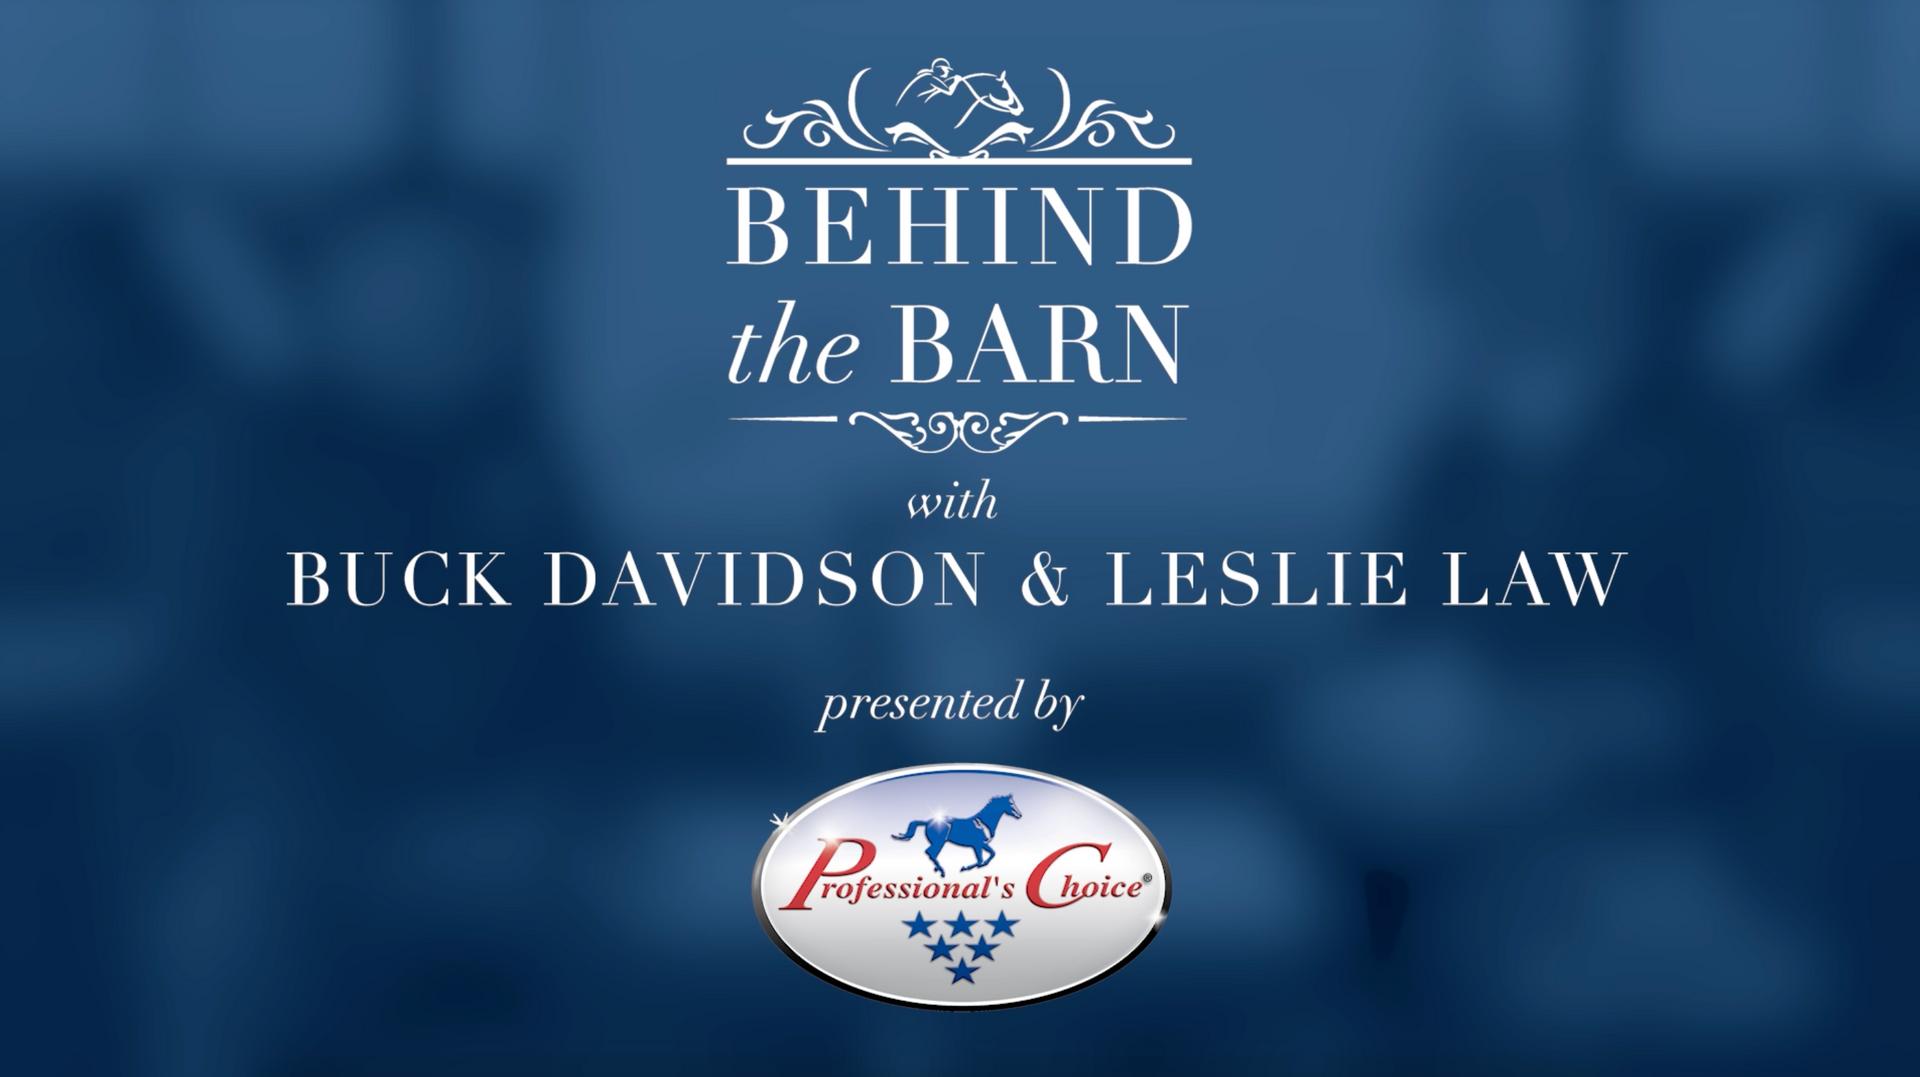 A poster for behind the barn with buck davidson and leslie law